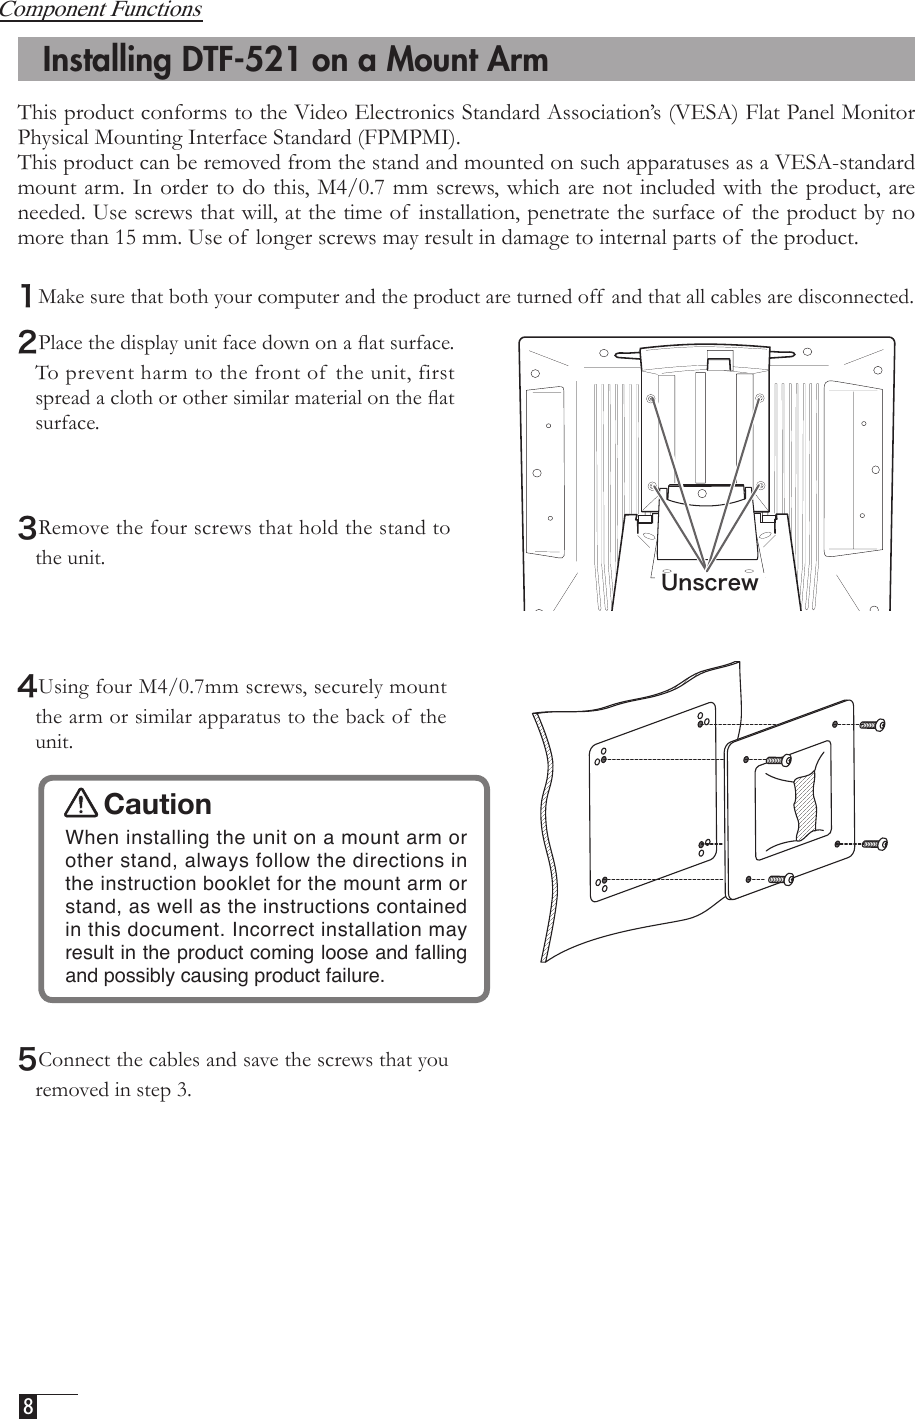  8    Installing DTF-521 on a Mount ArmCaution  When installing the unit on a mount arm or other stand, always follow the directions in the instruction booklet for the mount arm or stand, as well as the instructions contained in this document. Incorrect installation may result in the product coming loose and falling and possibly causing product failure. 5Connect the cables and save the screws that you removed in step 3. 3Remove the four screws that hold the stand to the unit.  4Using four M4/0.7mm screws, securely mount the arm or similar apparatus to the back of  the unit.2Place the display unit face down on a ﬂat surface. To prevent harm to the front of  the unit, first spread a cloth or other similar material on the ﬂat surface.UnscrewComponent FunctionsThis product conforms to the Video Electronics Standard Association’s (VESA) Flat Panel Monitor Physical Mounting Interface Standard (FPMPMI). This product can be removed from the stand and mounted on such apparatuses as a VESA-standard mount arm. In order to do this, M4/0.7 mm screws, which are not included with the product, are needed. Use screws that will, at the time of  installation, penetrate the surface of  the product by no more than 15 mm. Use of  longer screws may result in damage to internal parts of  the product. 1Make sure that both your computer and the product are turned off  and that all cables are disconnected.